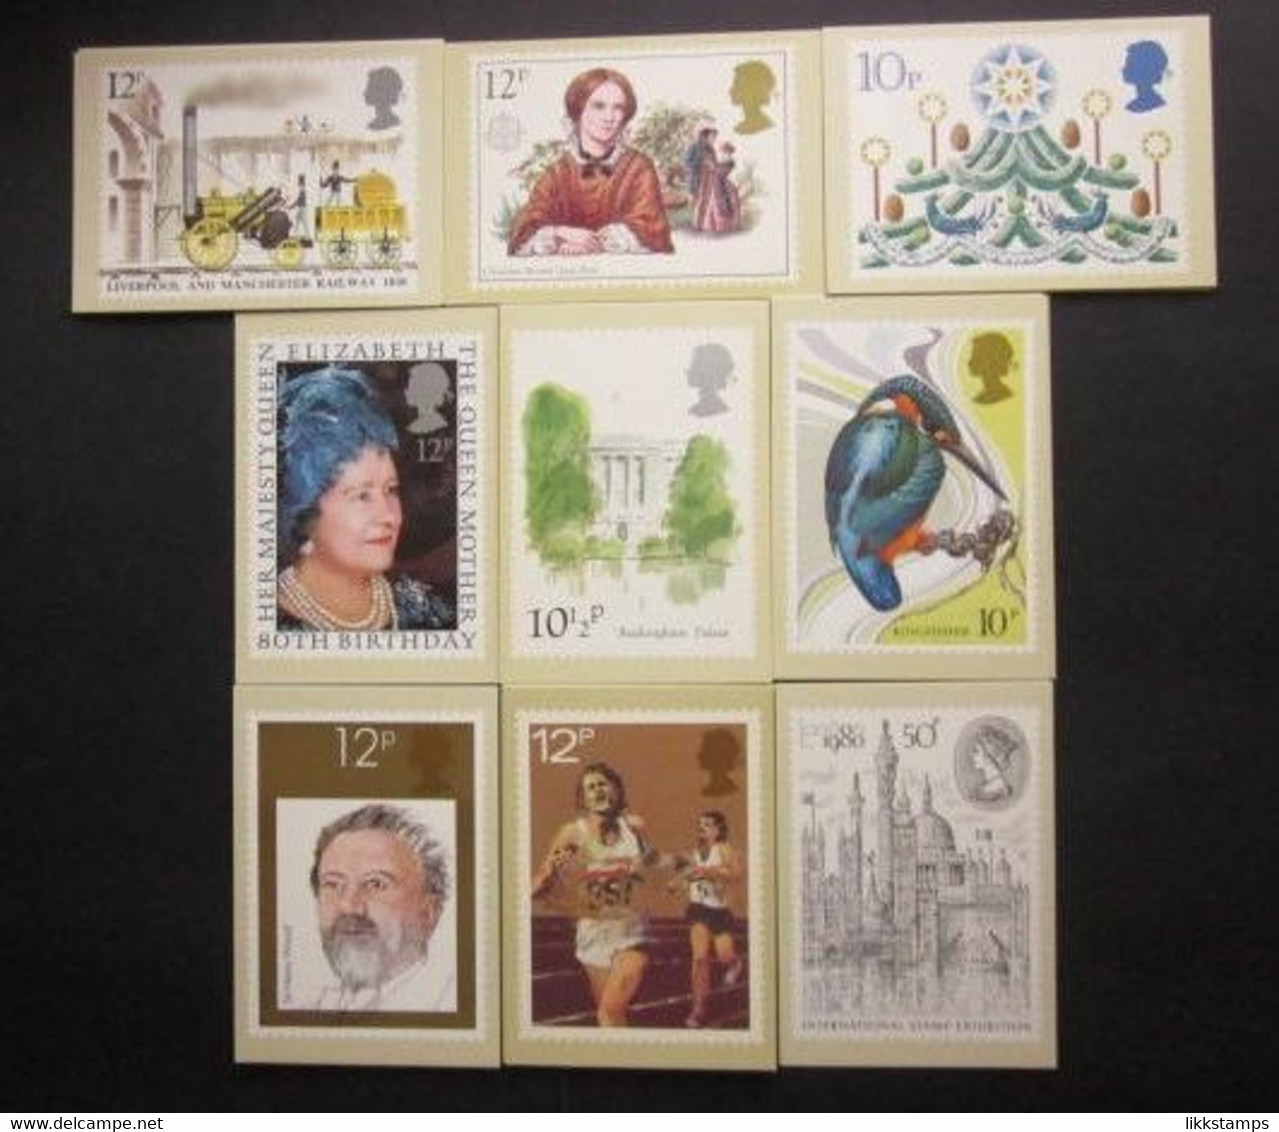 1980 THE COMPLETE YEAR SET OF P.H.Q. CARDS UNUSED. ISSUES Nos. 41 To 48 (B) #00989 - PHQ-Cards